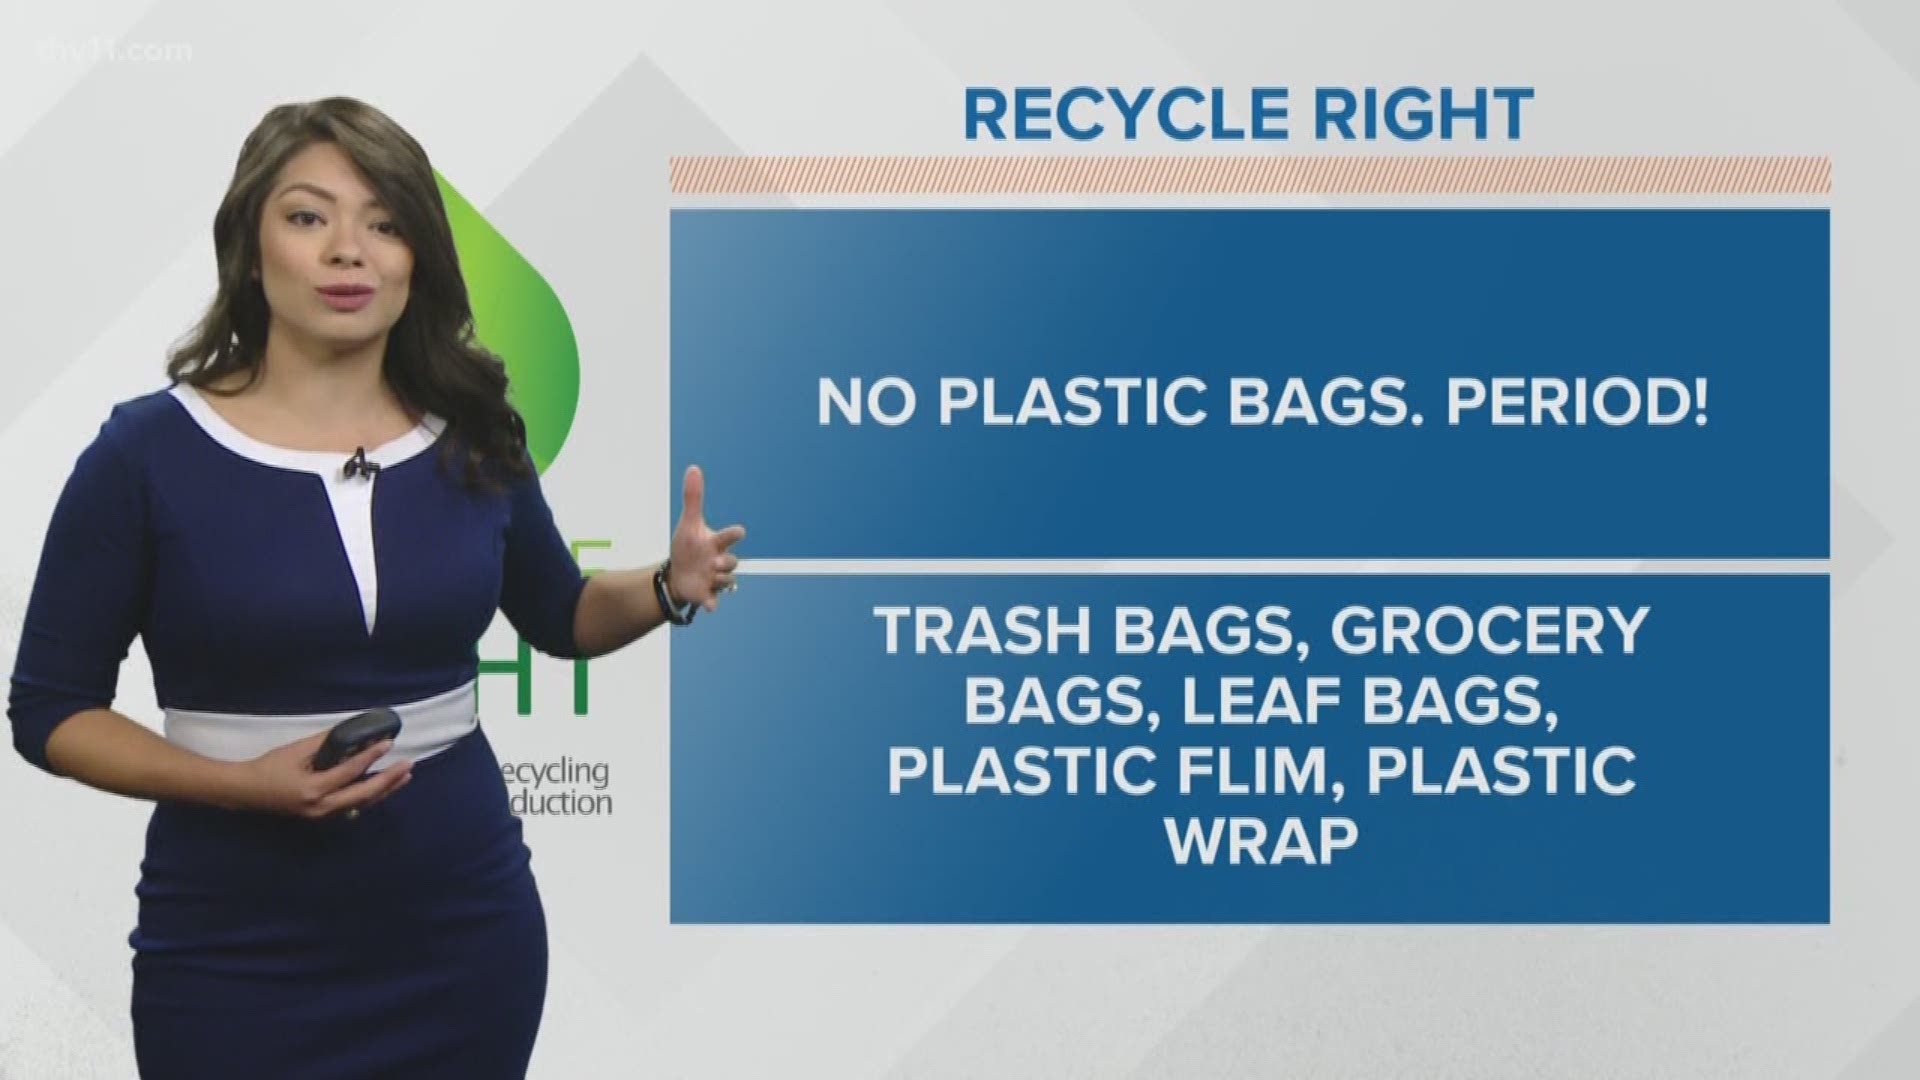 Mariel Ruiz has your Recycle Right tip for week 35.